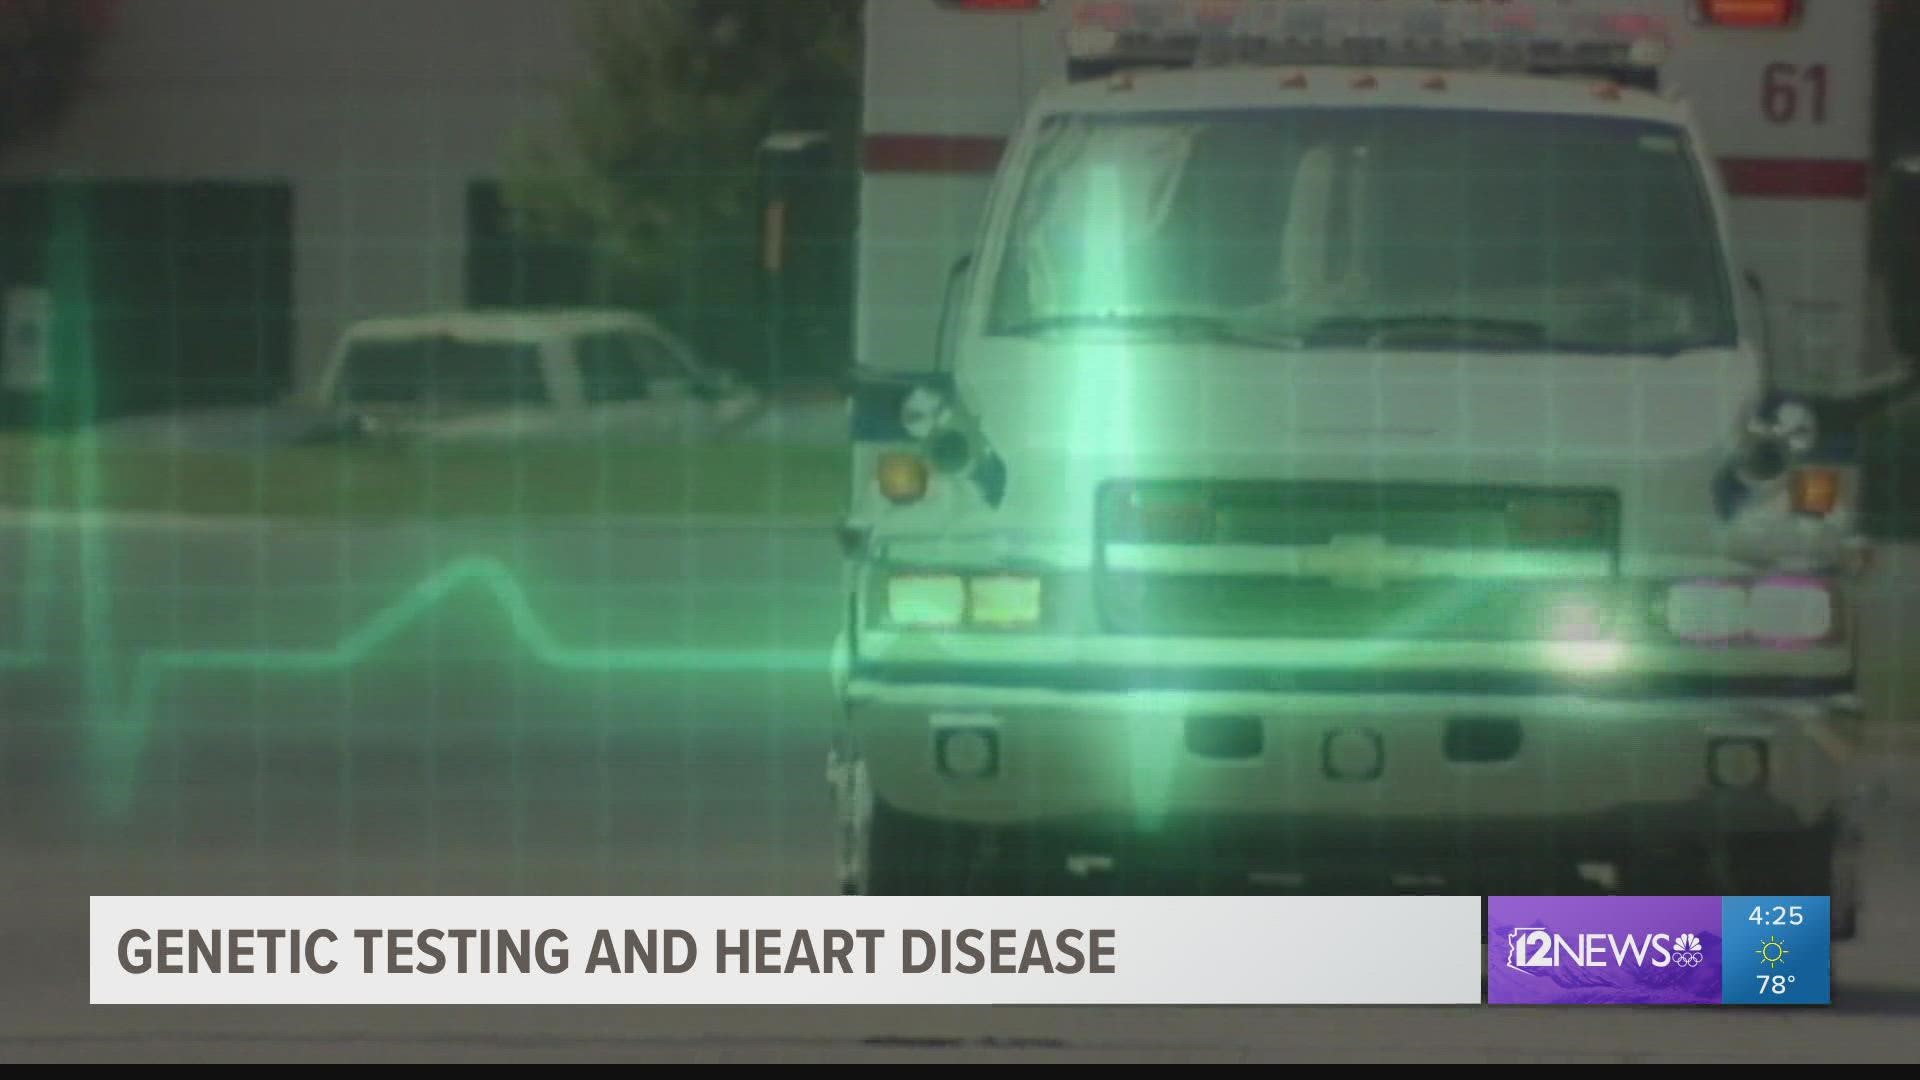 Thanks to Dignity Health in the Valley, genetic testing can be used to determine who's at risk for heart issues.